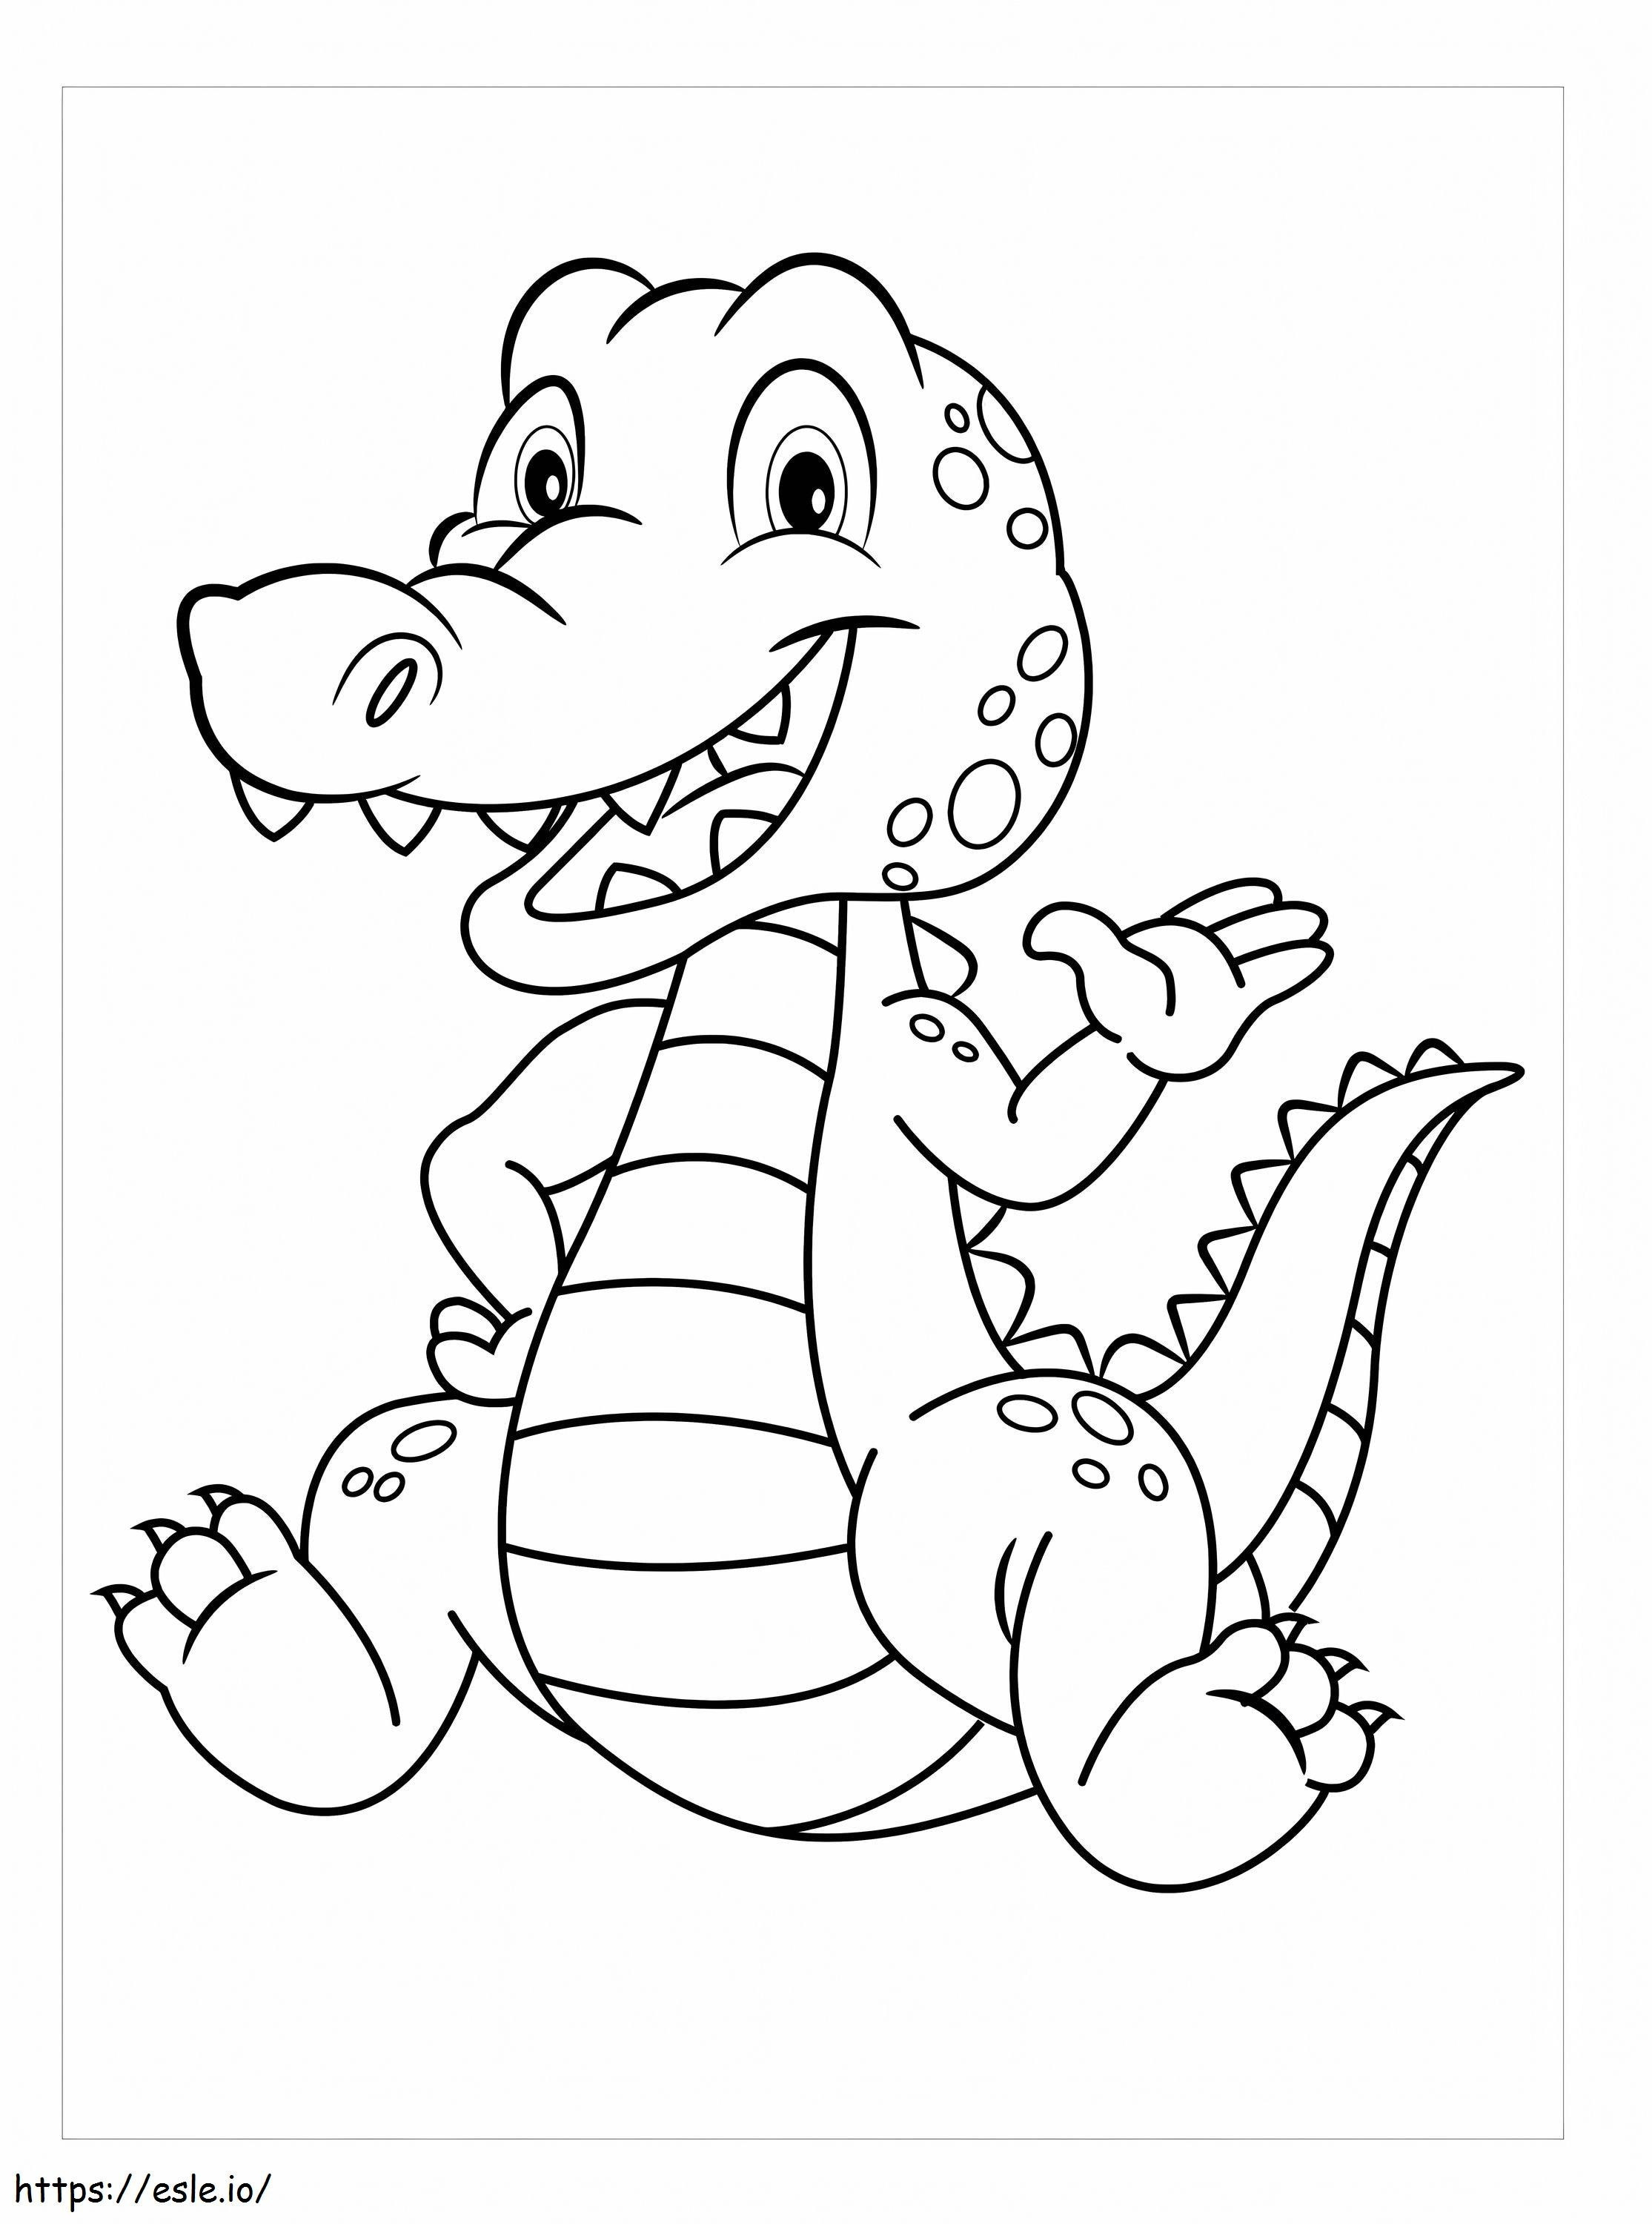 Funny Crocodile Sitting coloring page